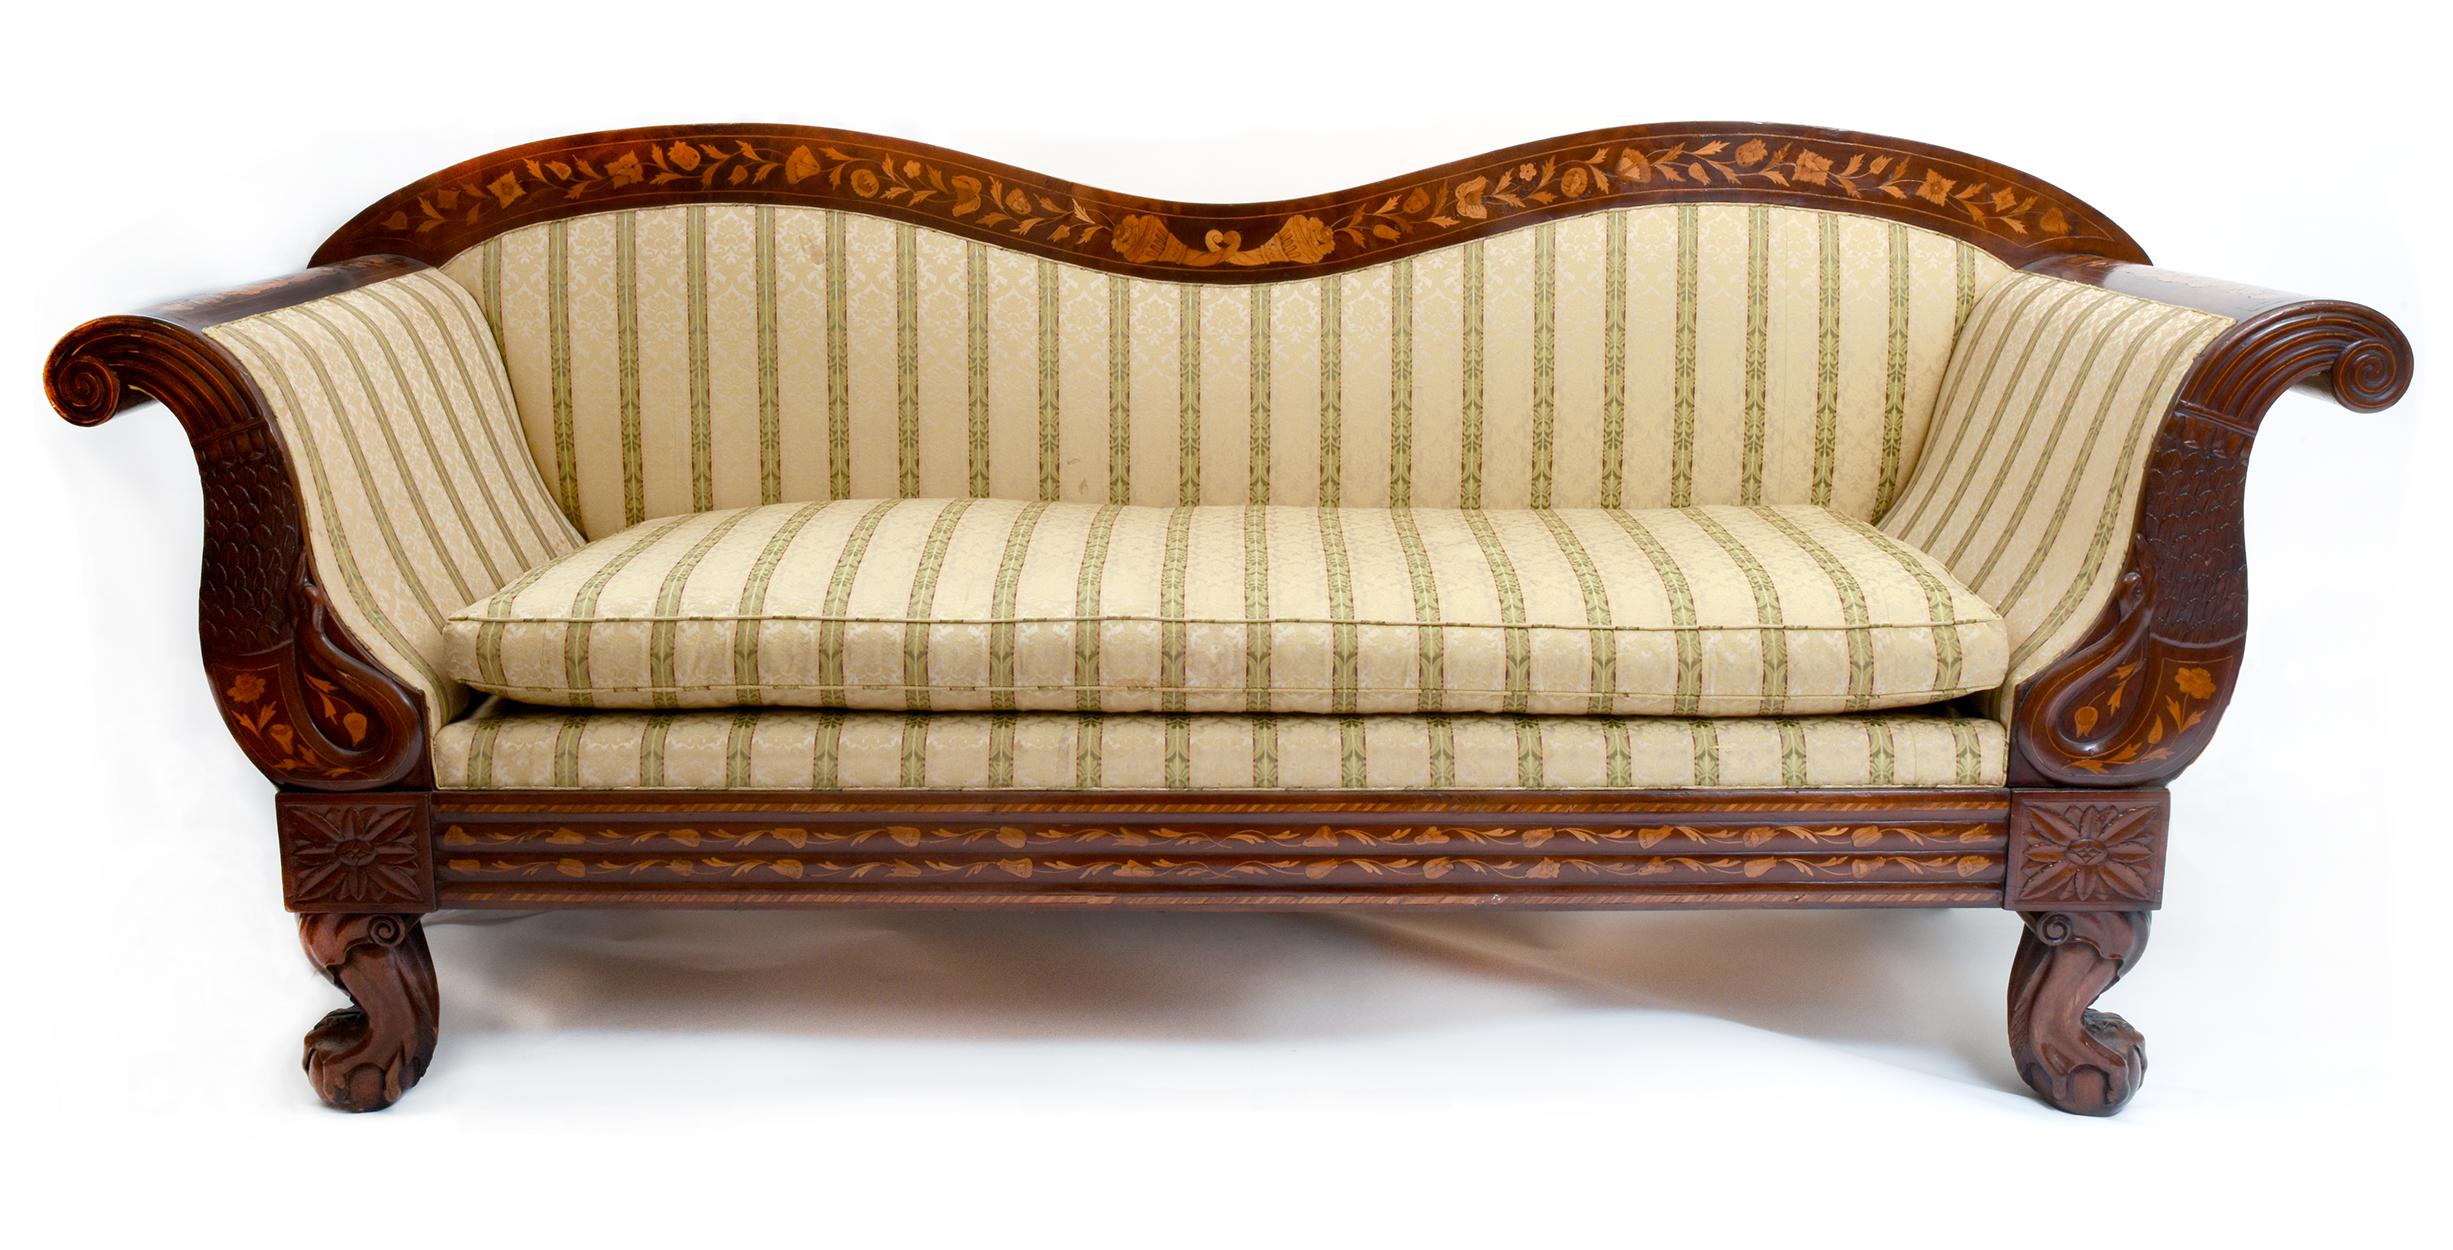 Early 19th Century Marquetry Wood Inlaid Sofa with Scrolled Back 5